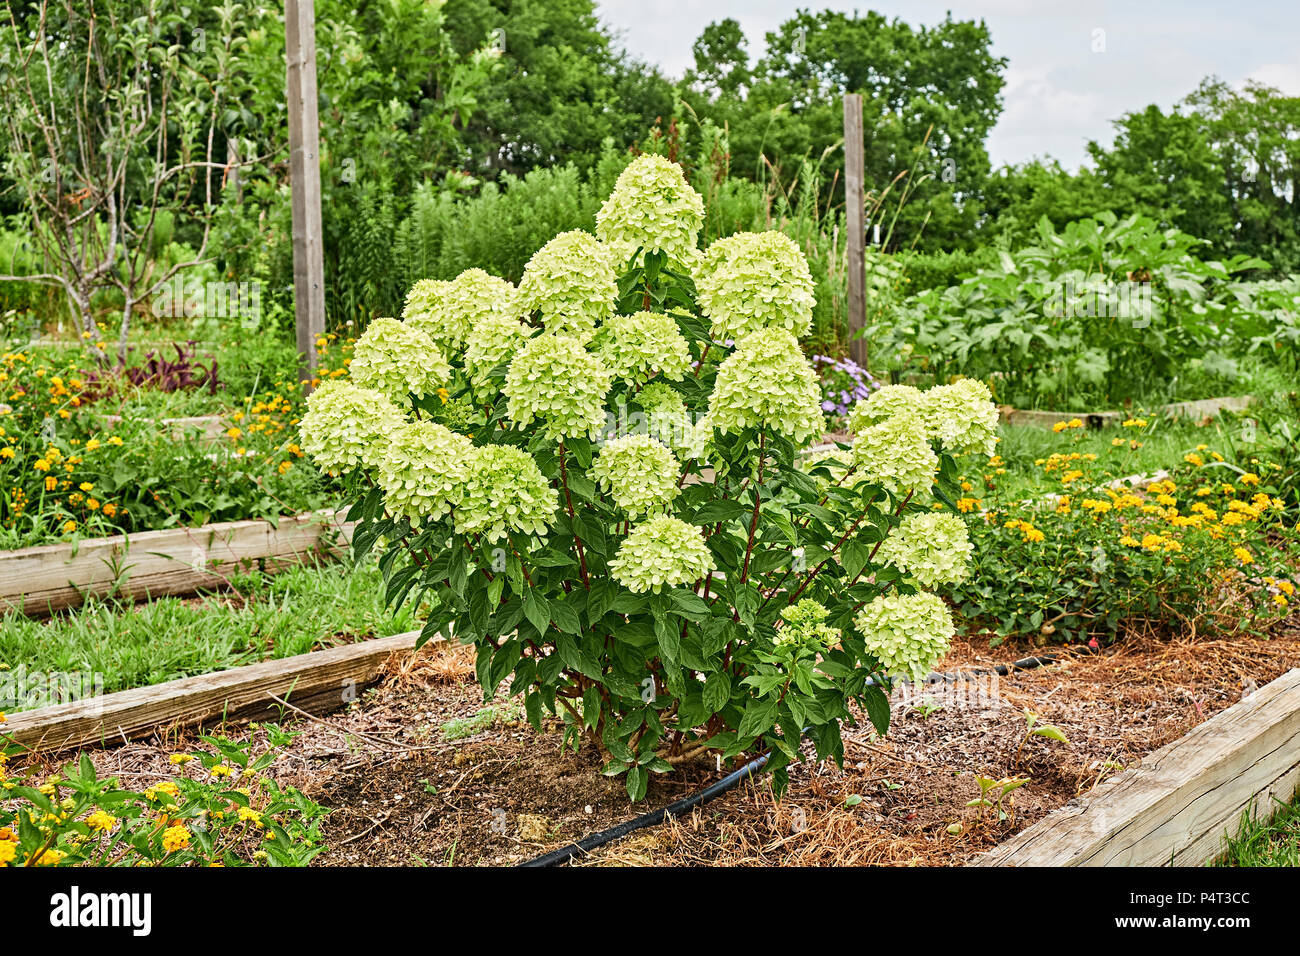 Hydrangea paniculata or panicle hydrangea, also known as a limelight hydrangea blooming in a raised garden. Stock Photo